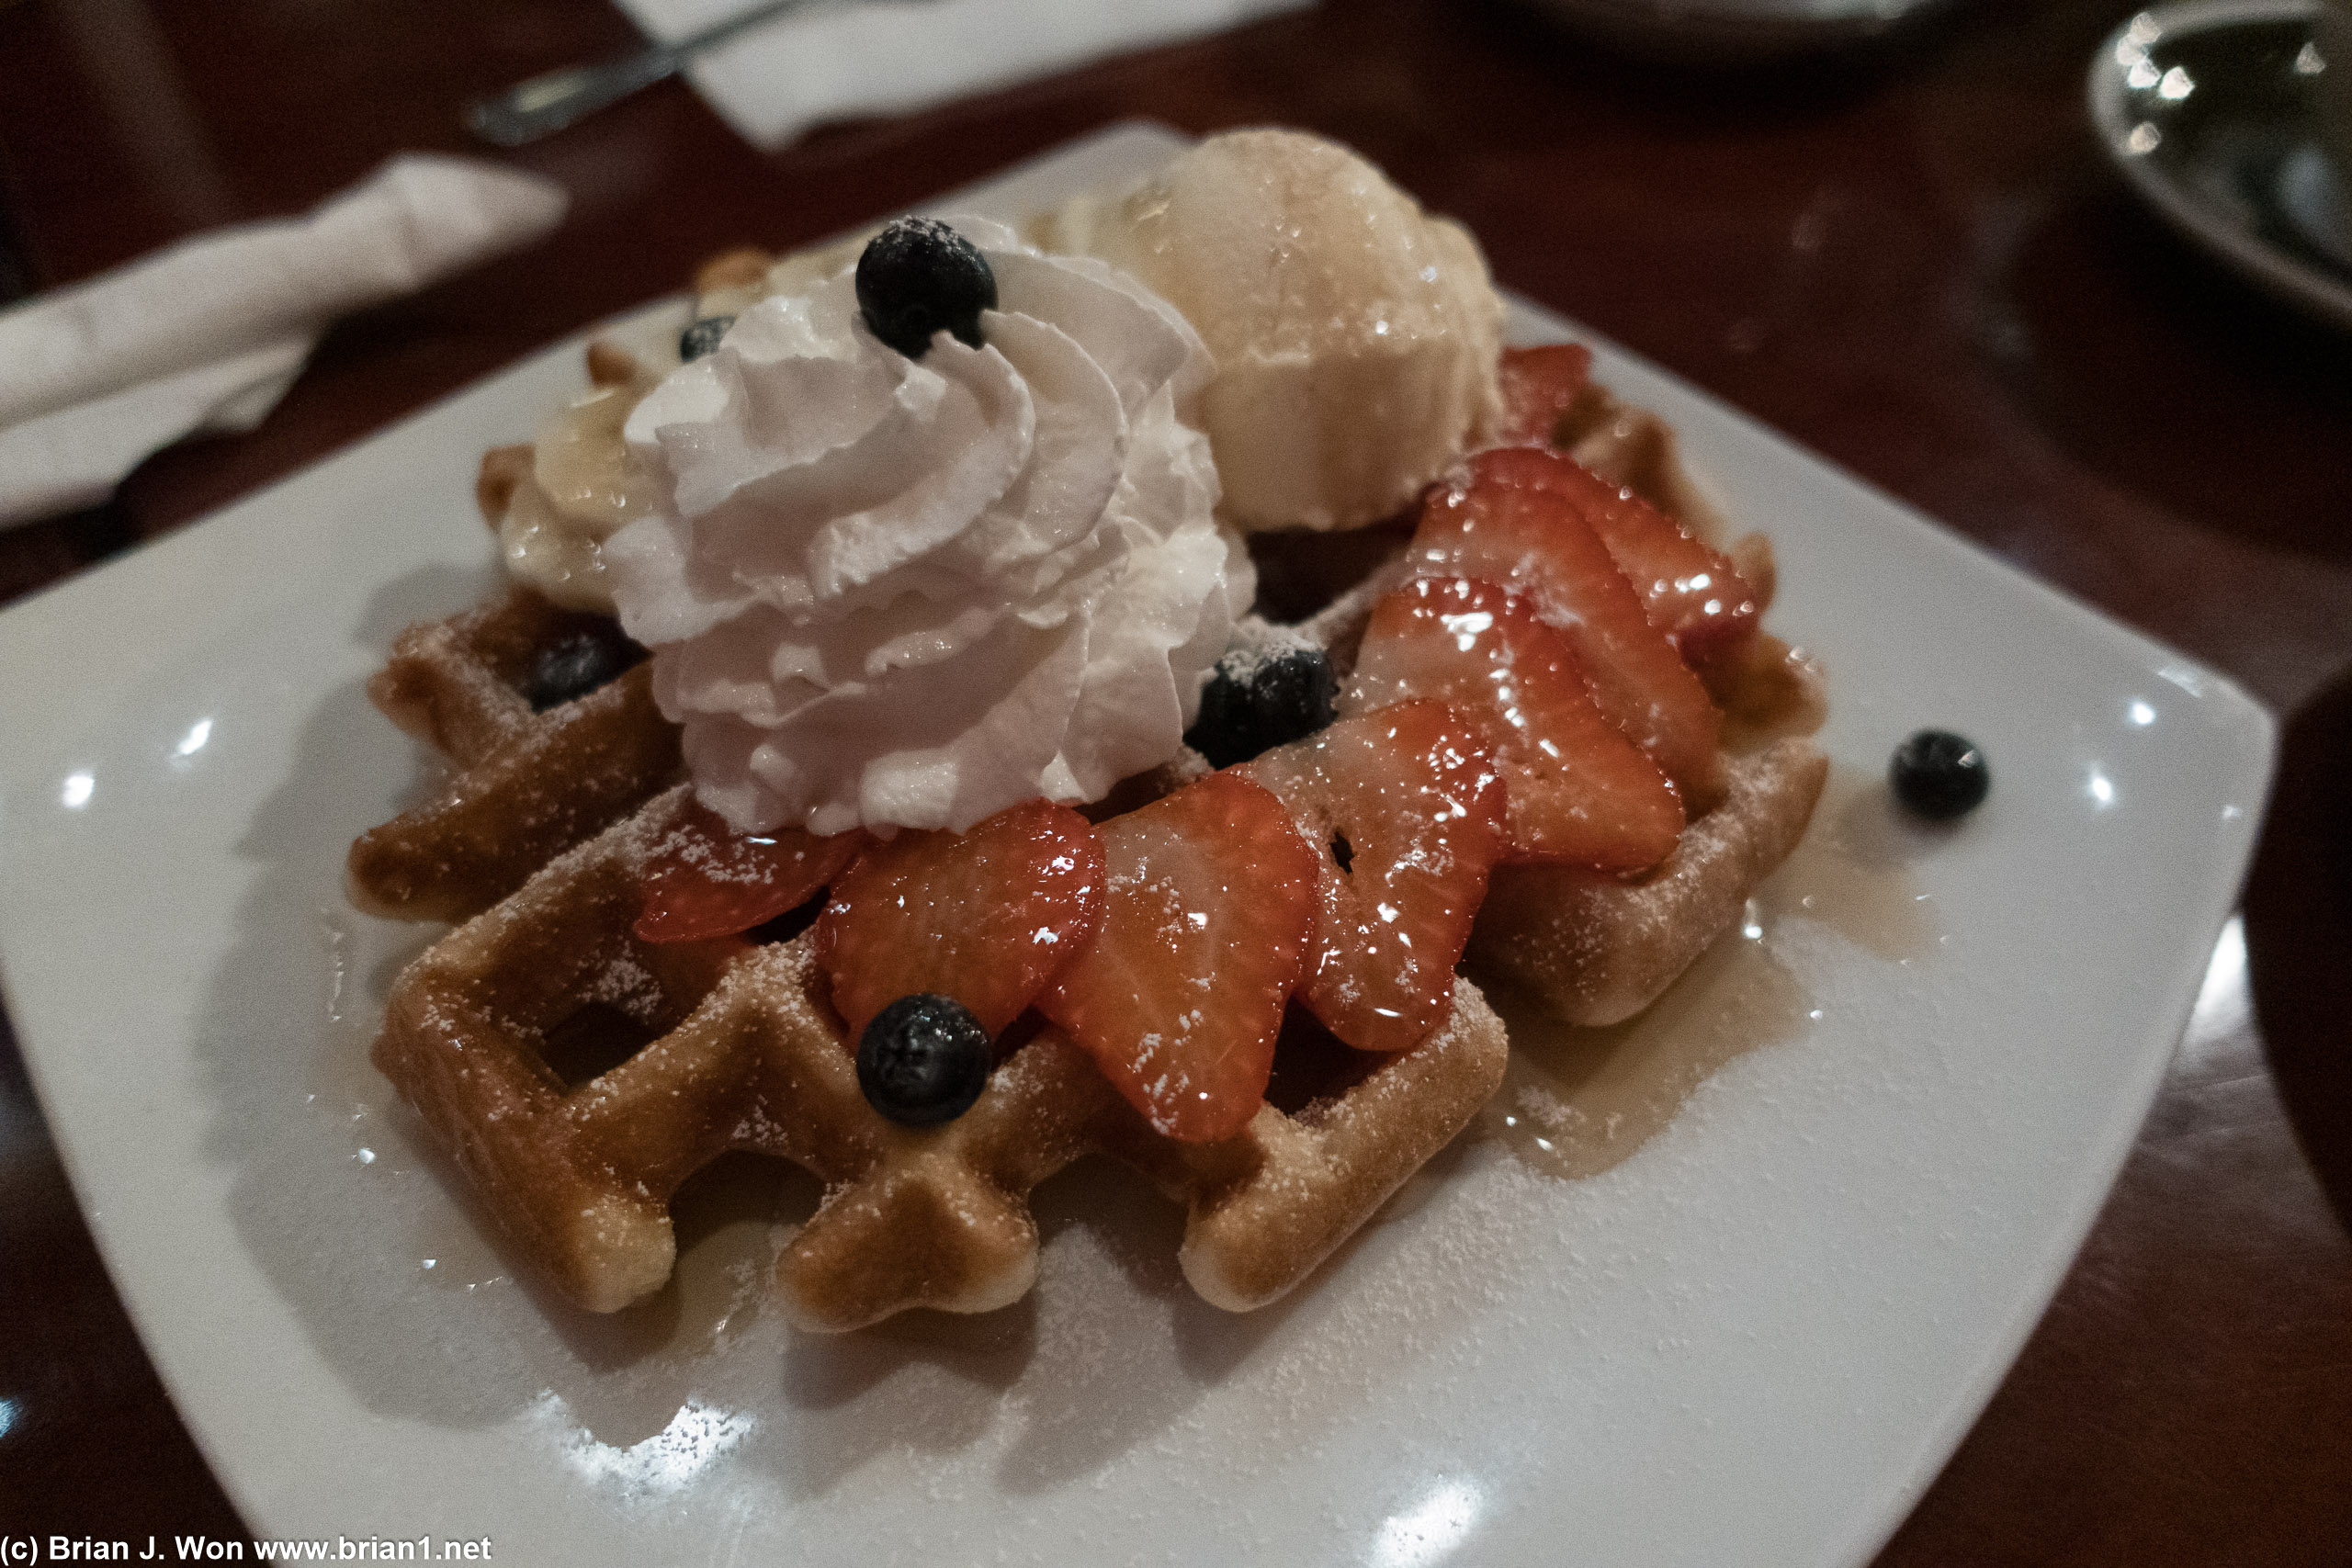 Waffle, fruit, and ice cream for dessert.